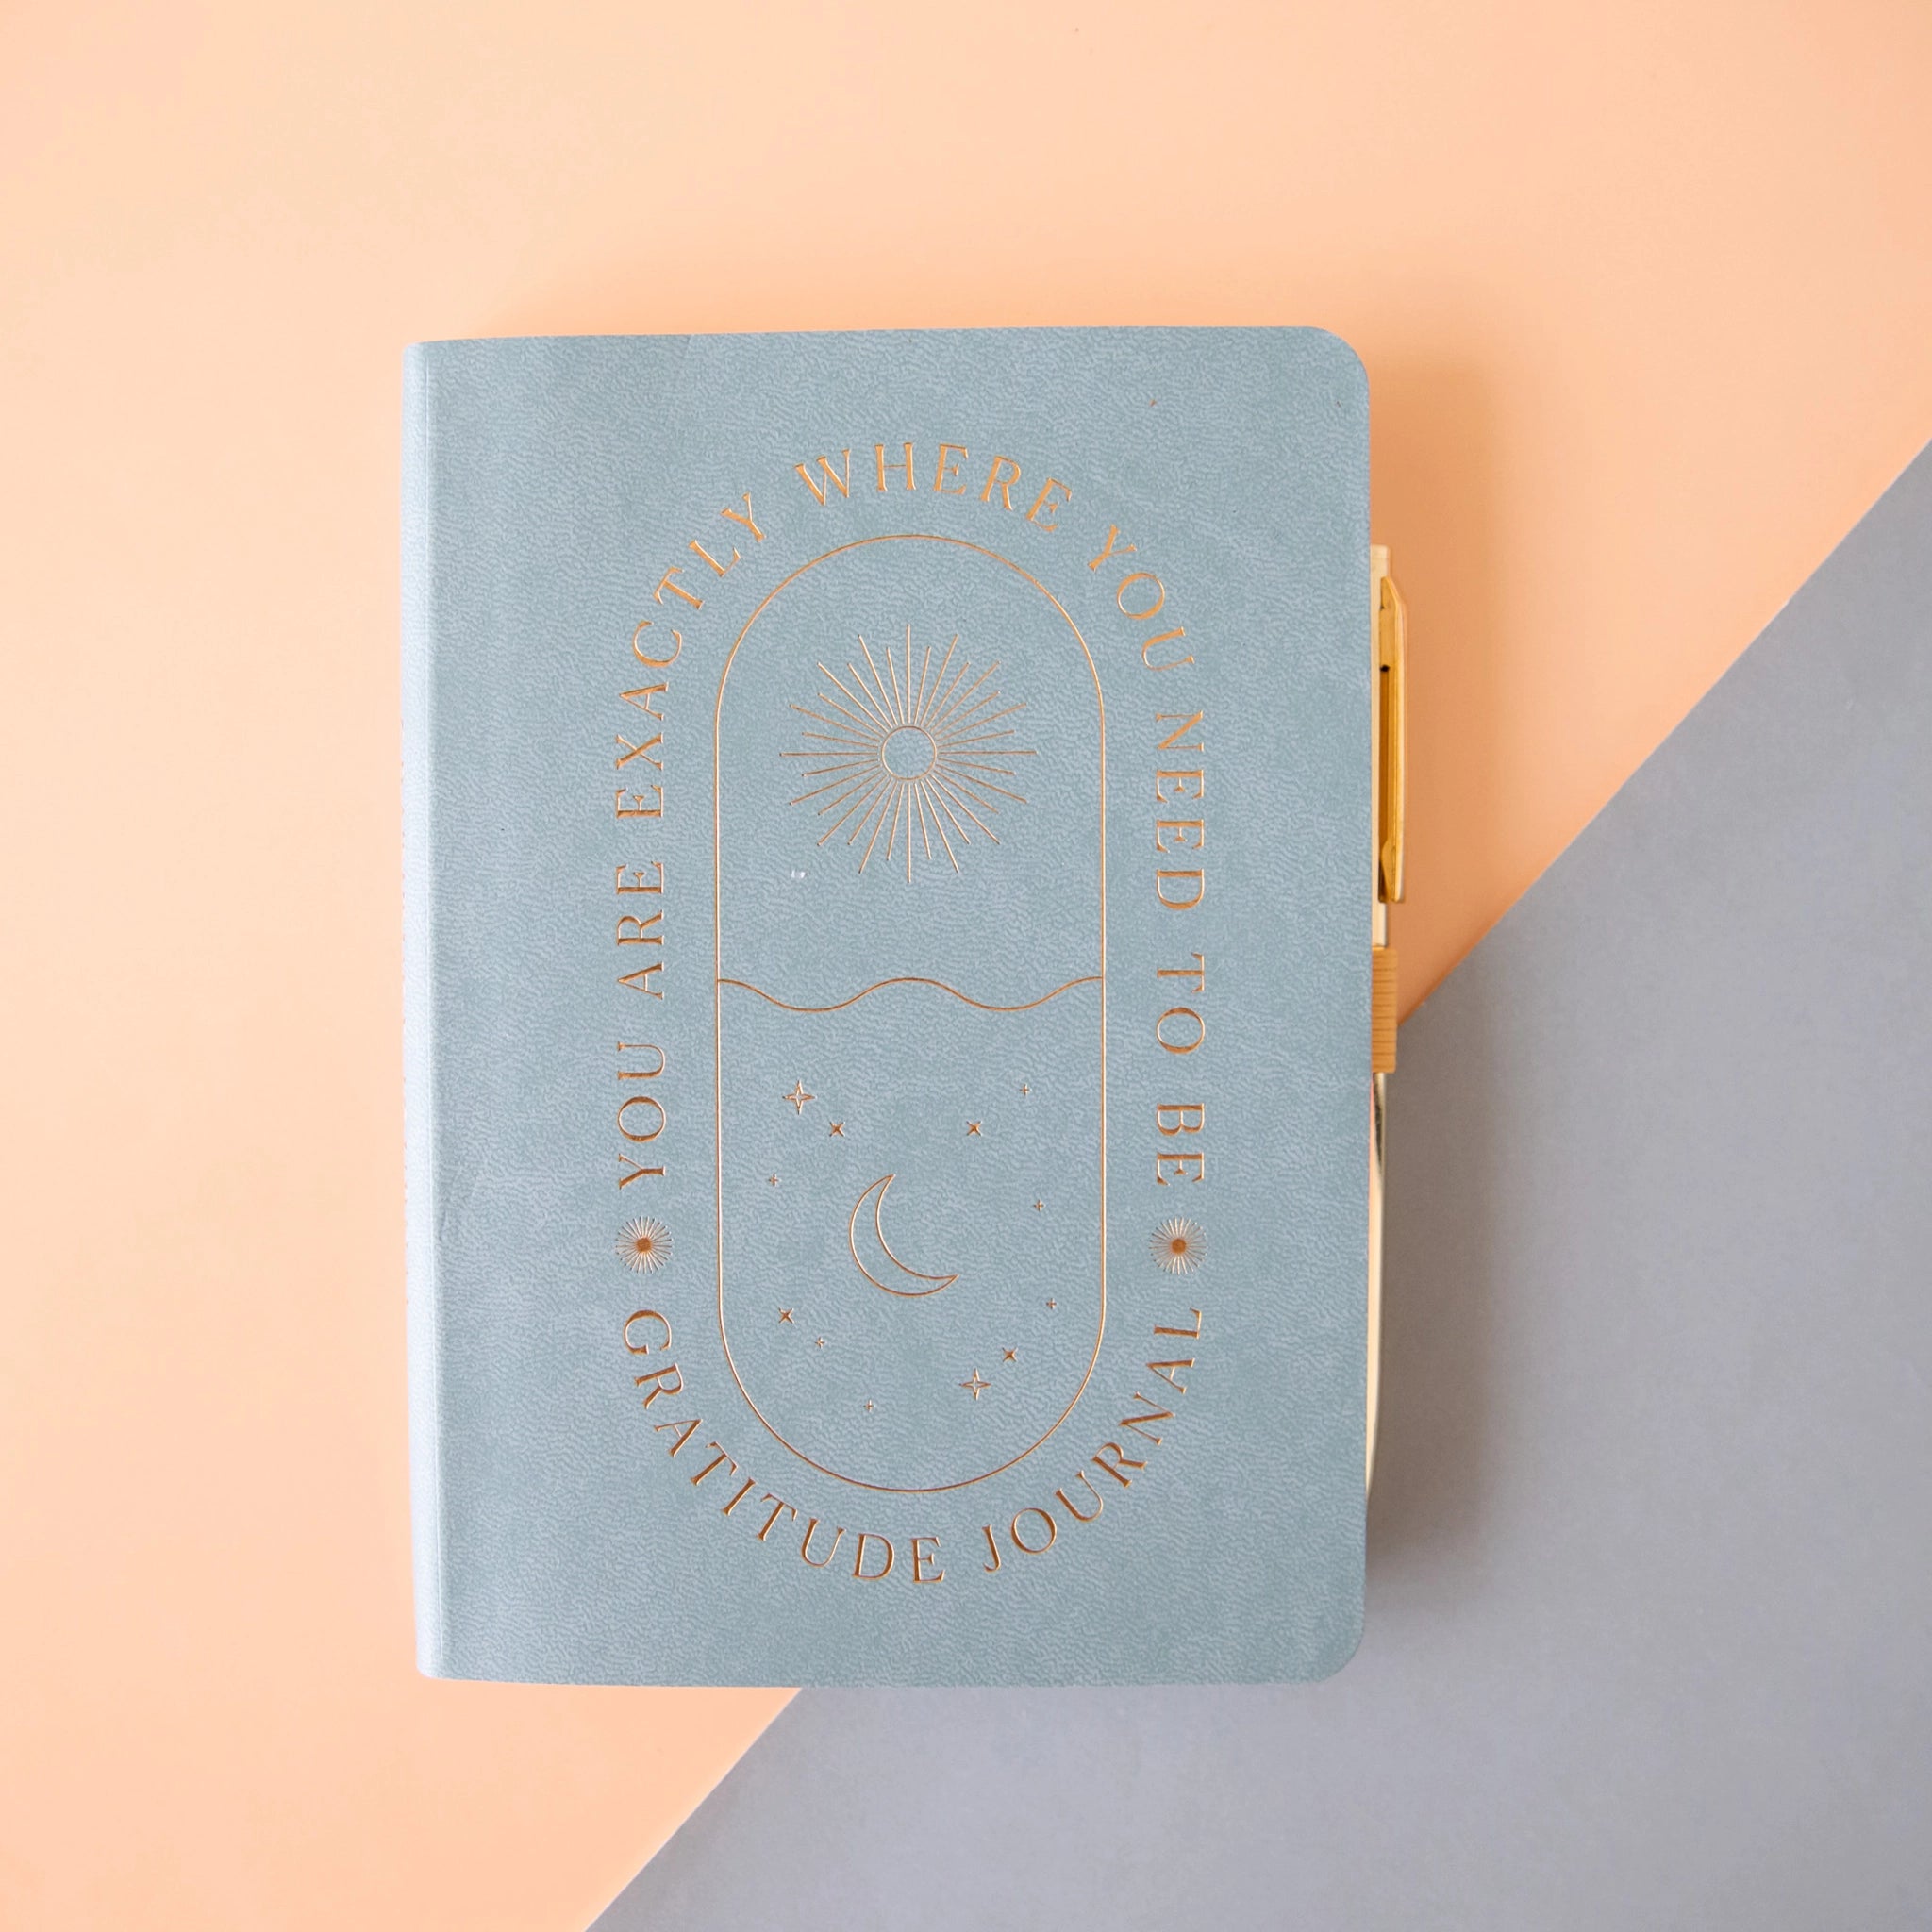 On a peach and light blue background is a light blue journal with gold text that reads, "You Are Exactly Where You Need To Be" and "Gratitude Journal" around an oval shape that has a sun and a moon inside. It also includes a gold pen. 